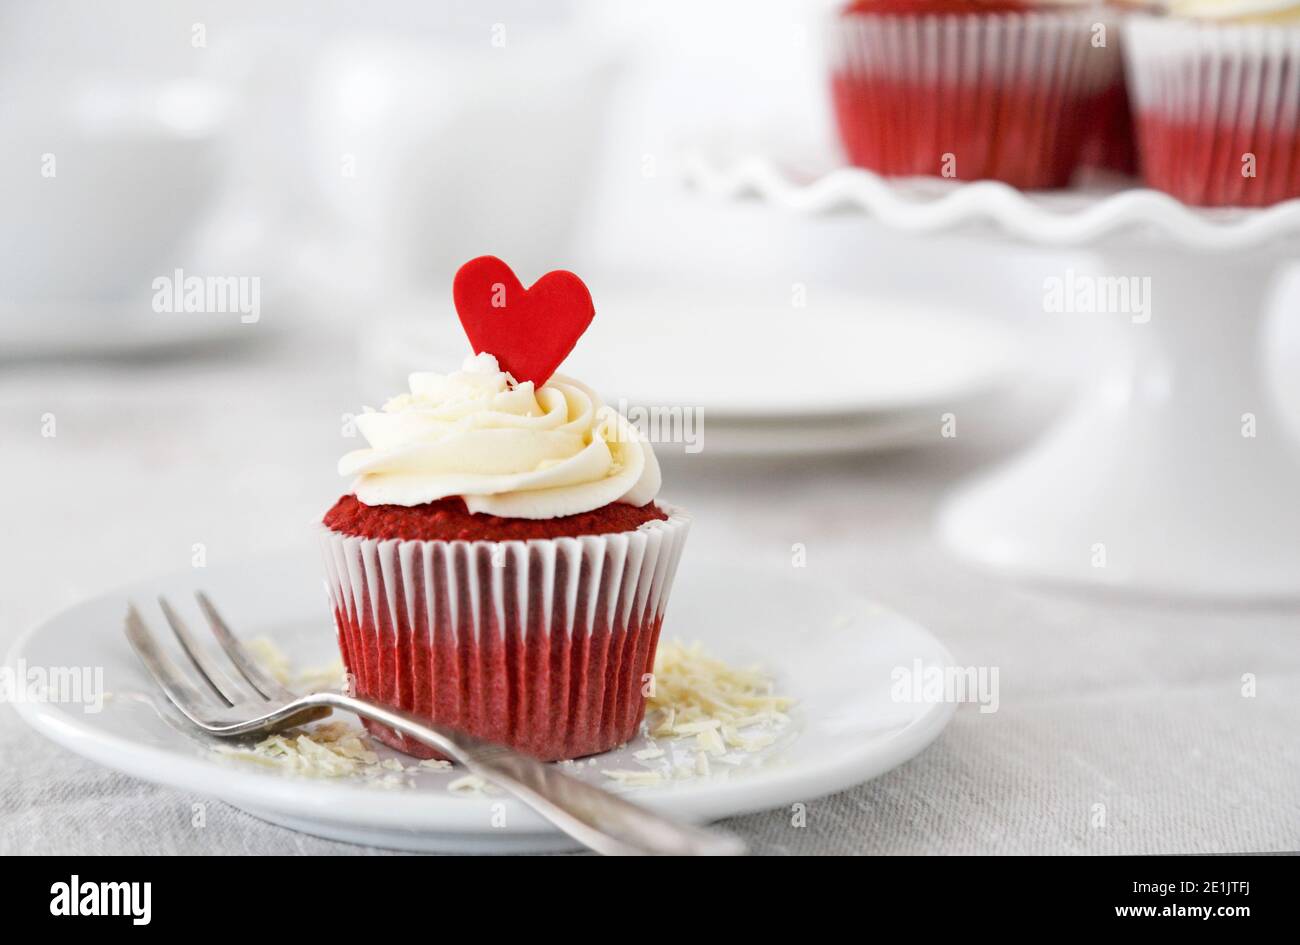 Red velvet cupcakes with a red heart for Valentine's day Stock Photo